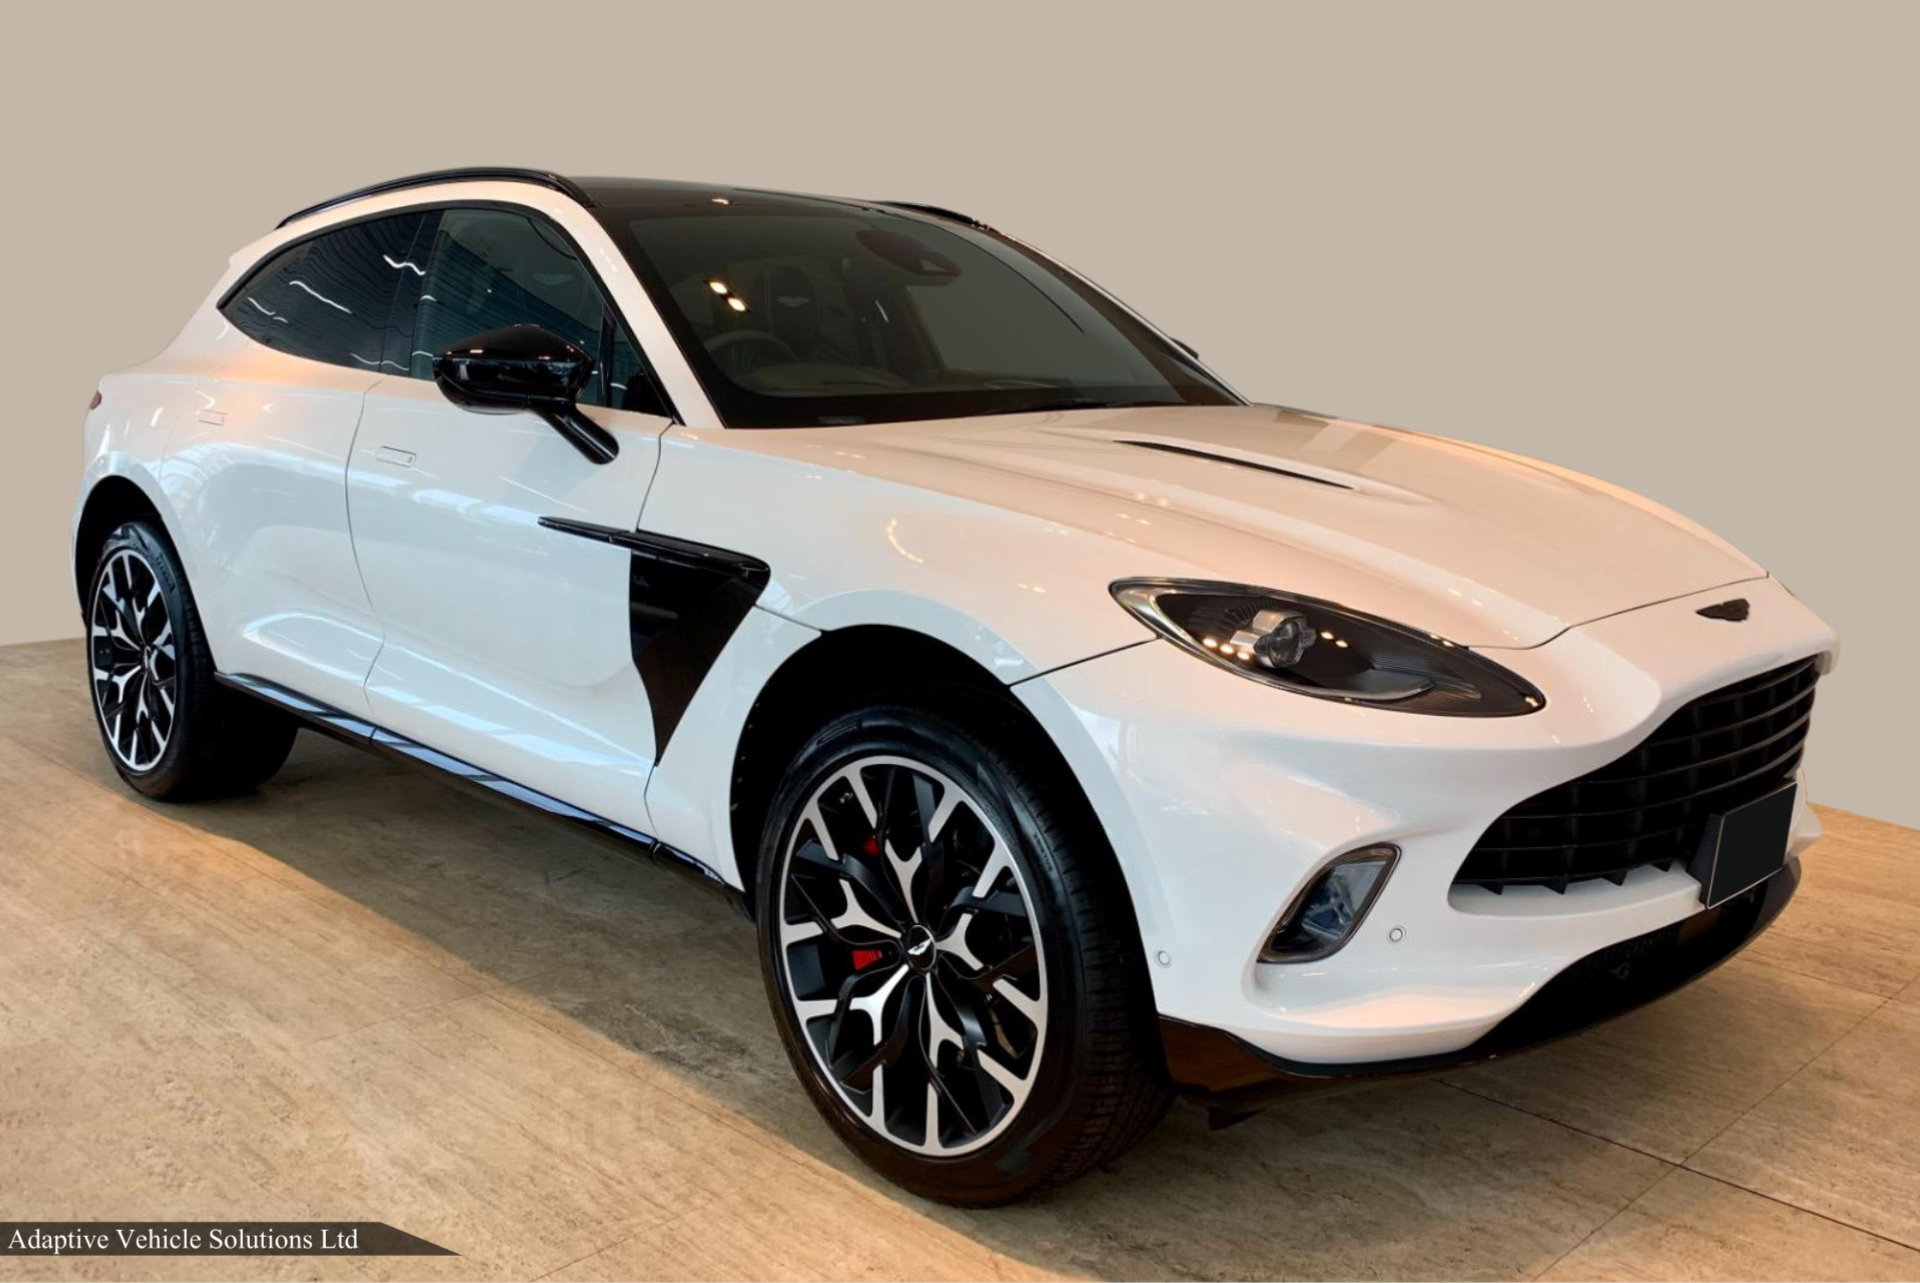 2021 Aston Martin DBX White off side front view